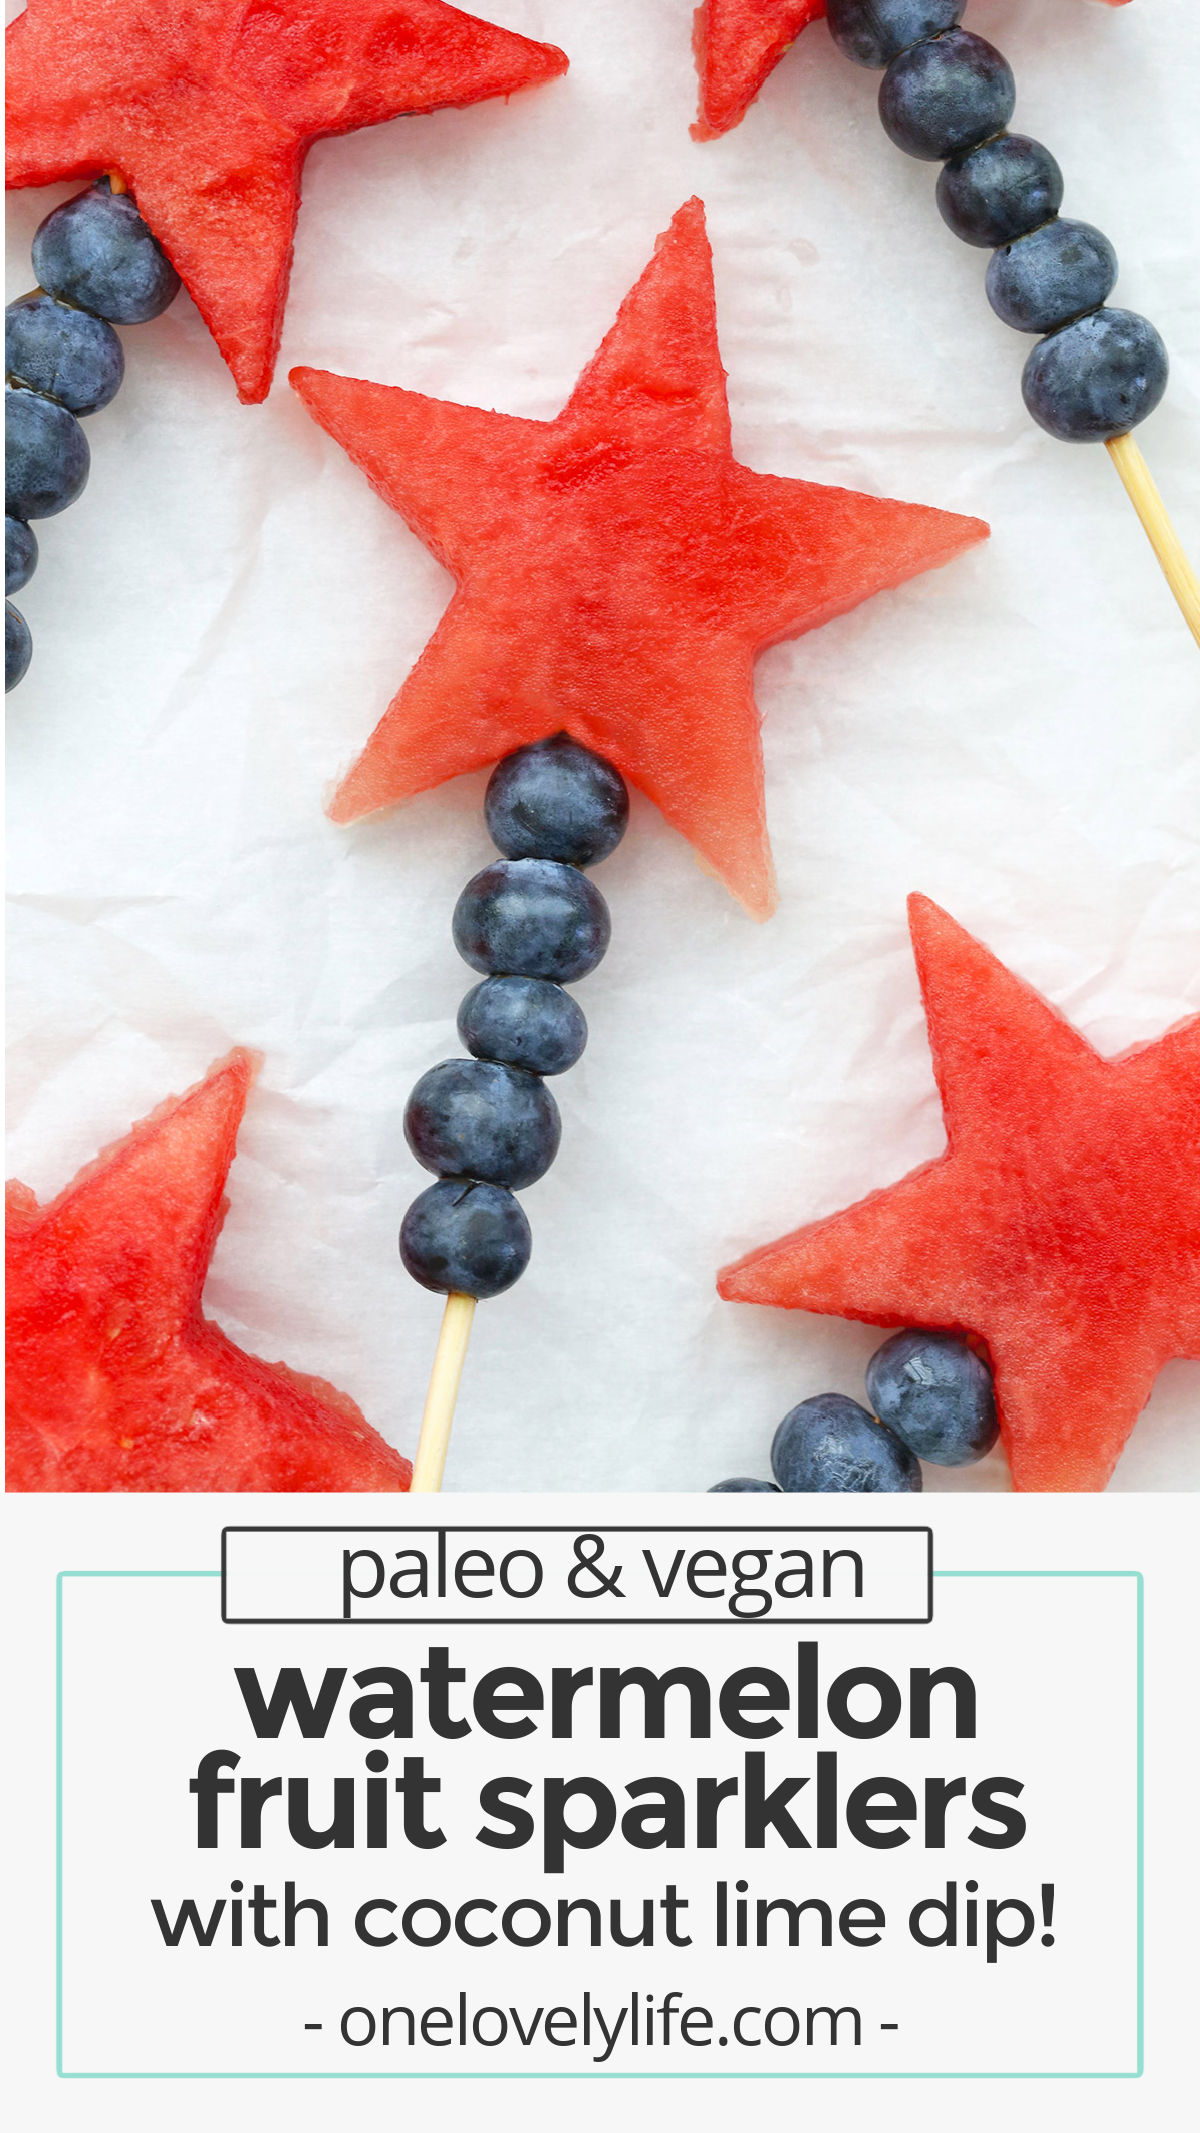 Watermelon Star Sparklers - Watermelon stars and blueberries combine to make these fun, patriotic fruit sparklers. They're a perfect, easy snack or summer side dish. (Naturally Paleo, Vegan & Gluten-Free) // Patriotic Fruit Skewers // 4th of July Side Dish // Red White and Blue Recipes // 4th of july snack // 4th of july menu // fun snacks for kids // kids snack // kids snack with fruit / watermelon recipes